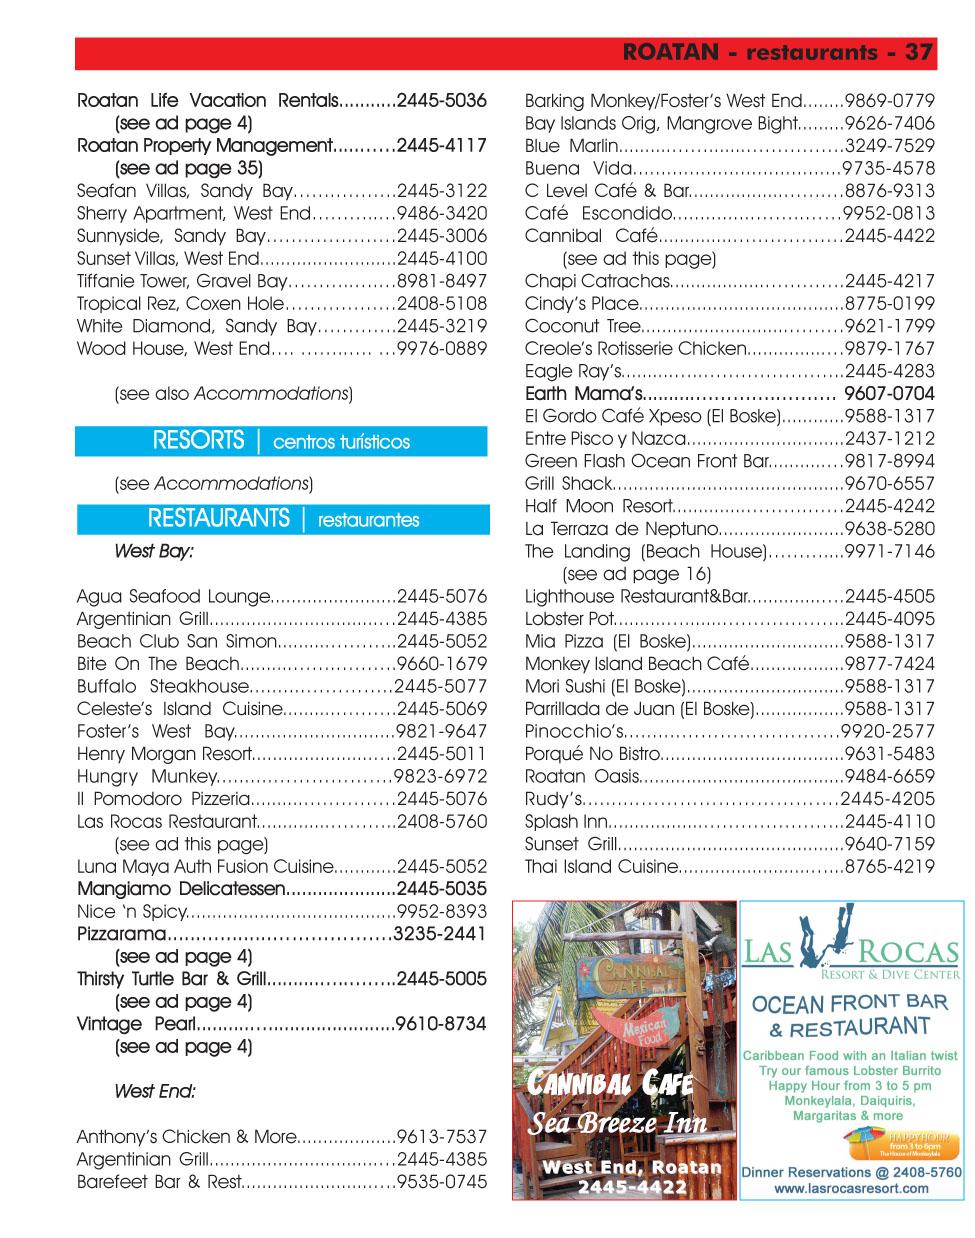 Roatan Life Vacation Rentals...2445-5036 [see ad page 4) Roatan Properly Management...2445-4117 [see ad page 35] Seafan Villas, Sandy Bay...2445-3122 Sherry Apartment. West End.